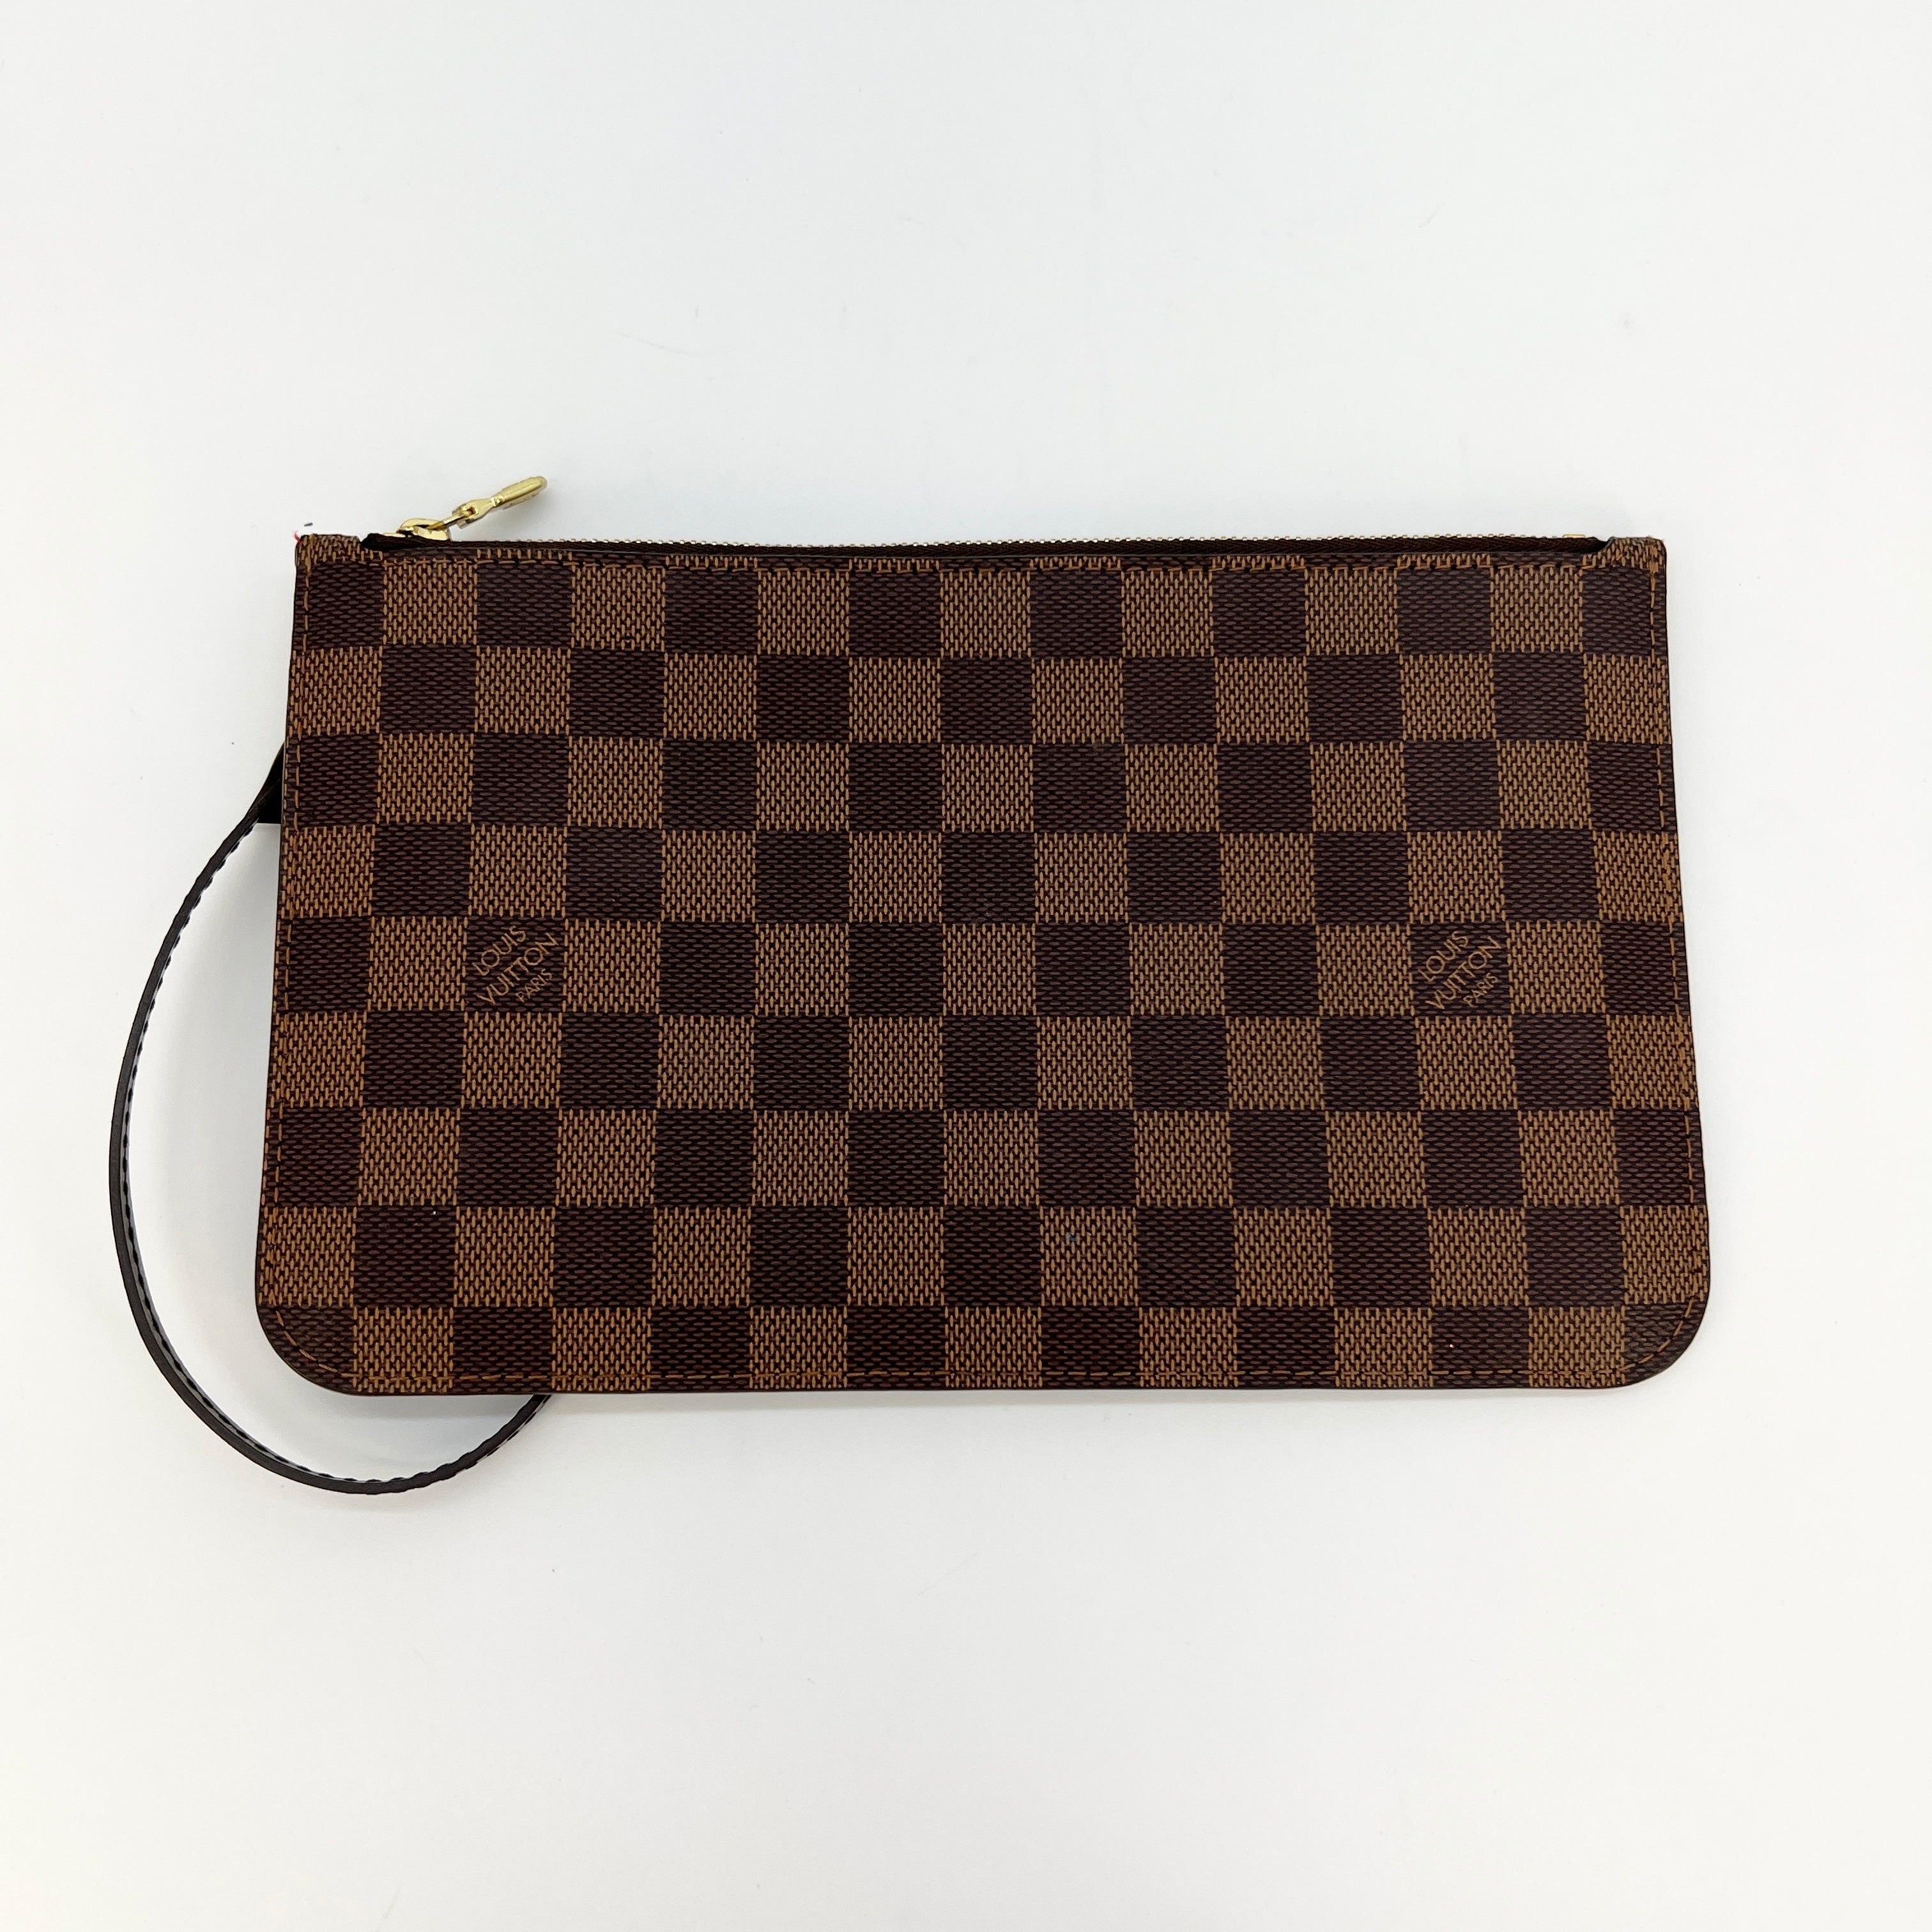 LOUIS VUITTON COSMETIC POUCH MONEY BACK GUARANTEED GENUINE